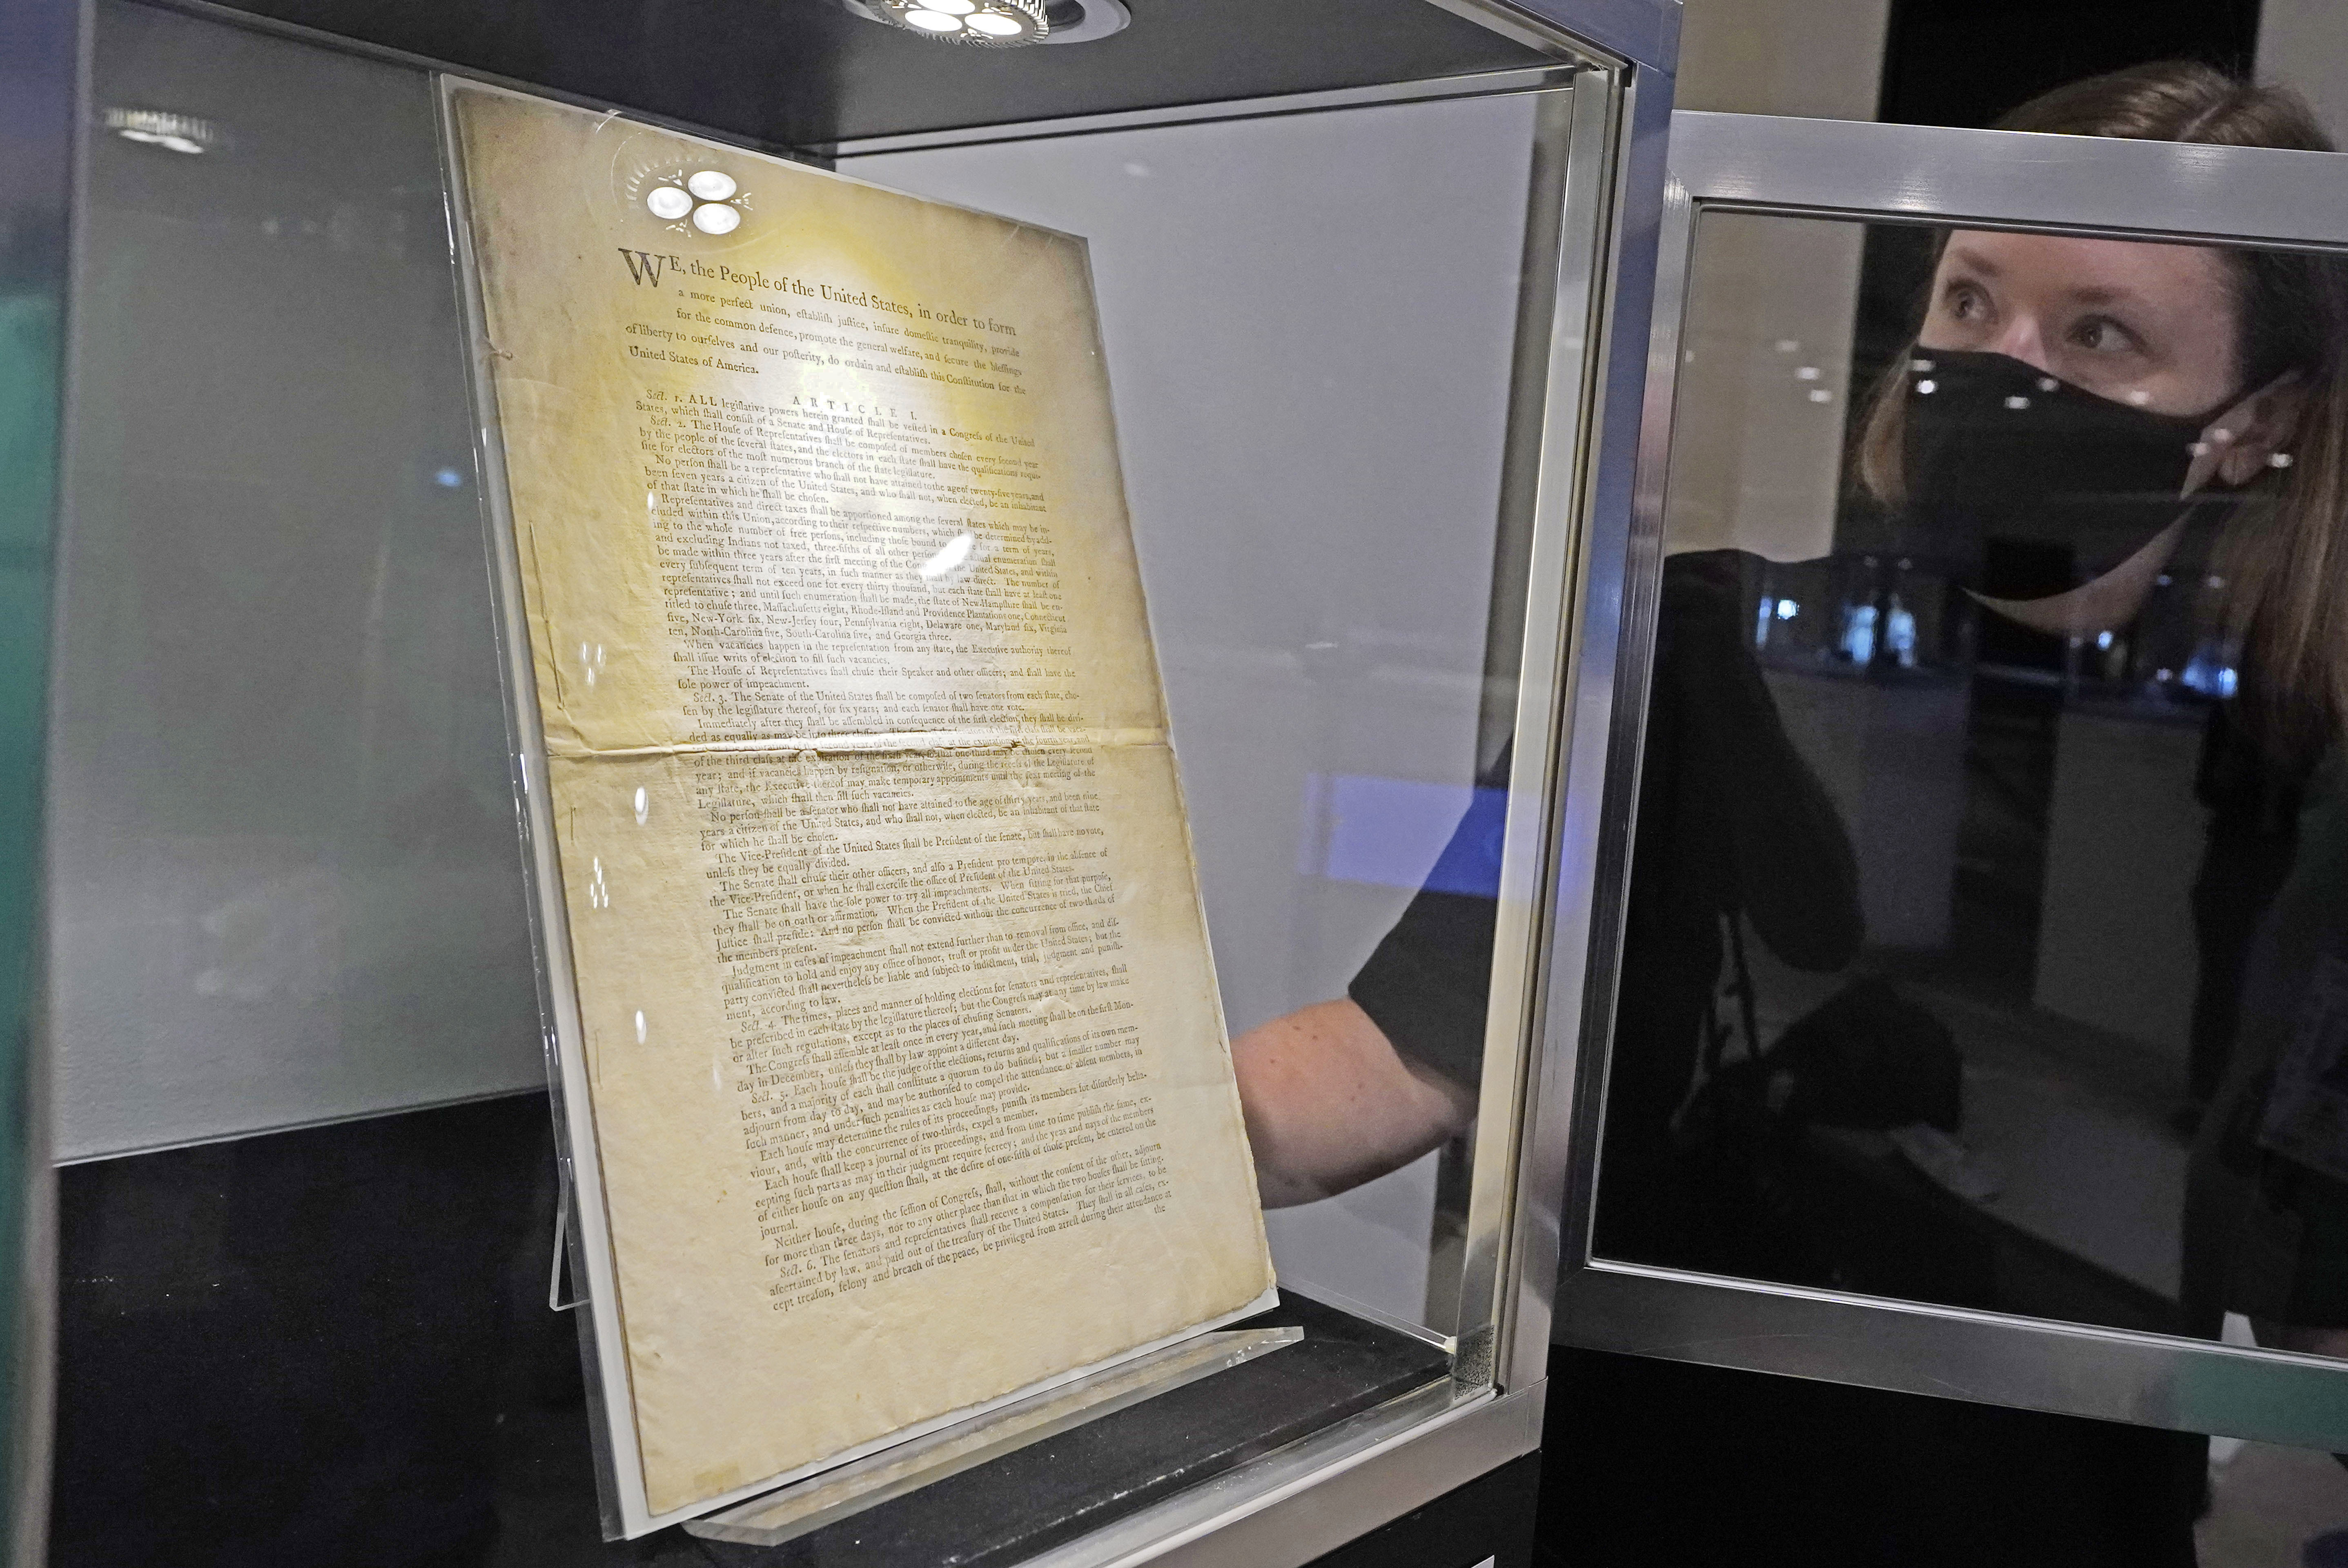 A 1787 printed copy of the Constitution sold at Sotheby's in New York this year for $43.2 million, a record price for a document or book sold at auction.